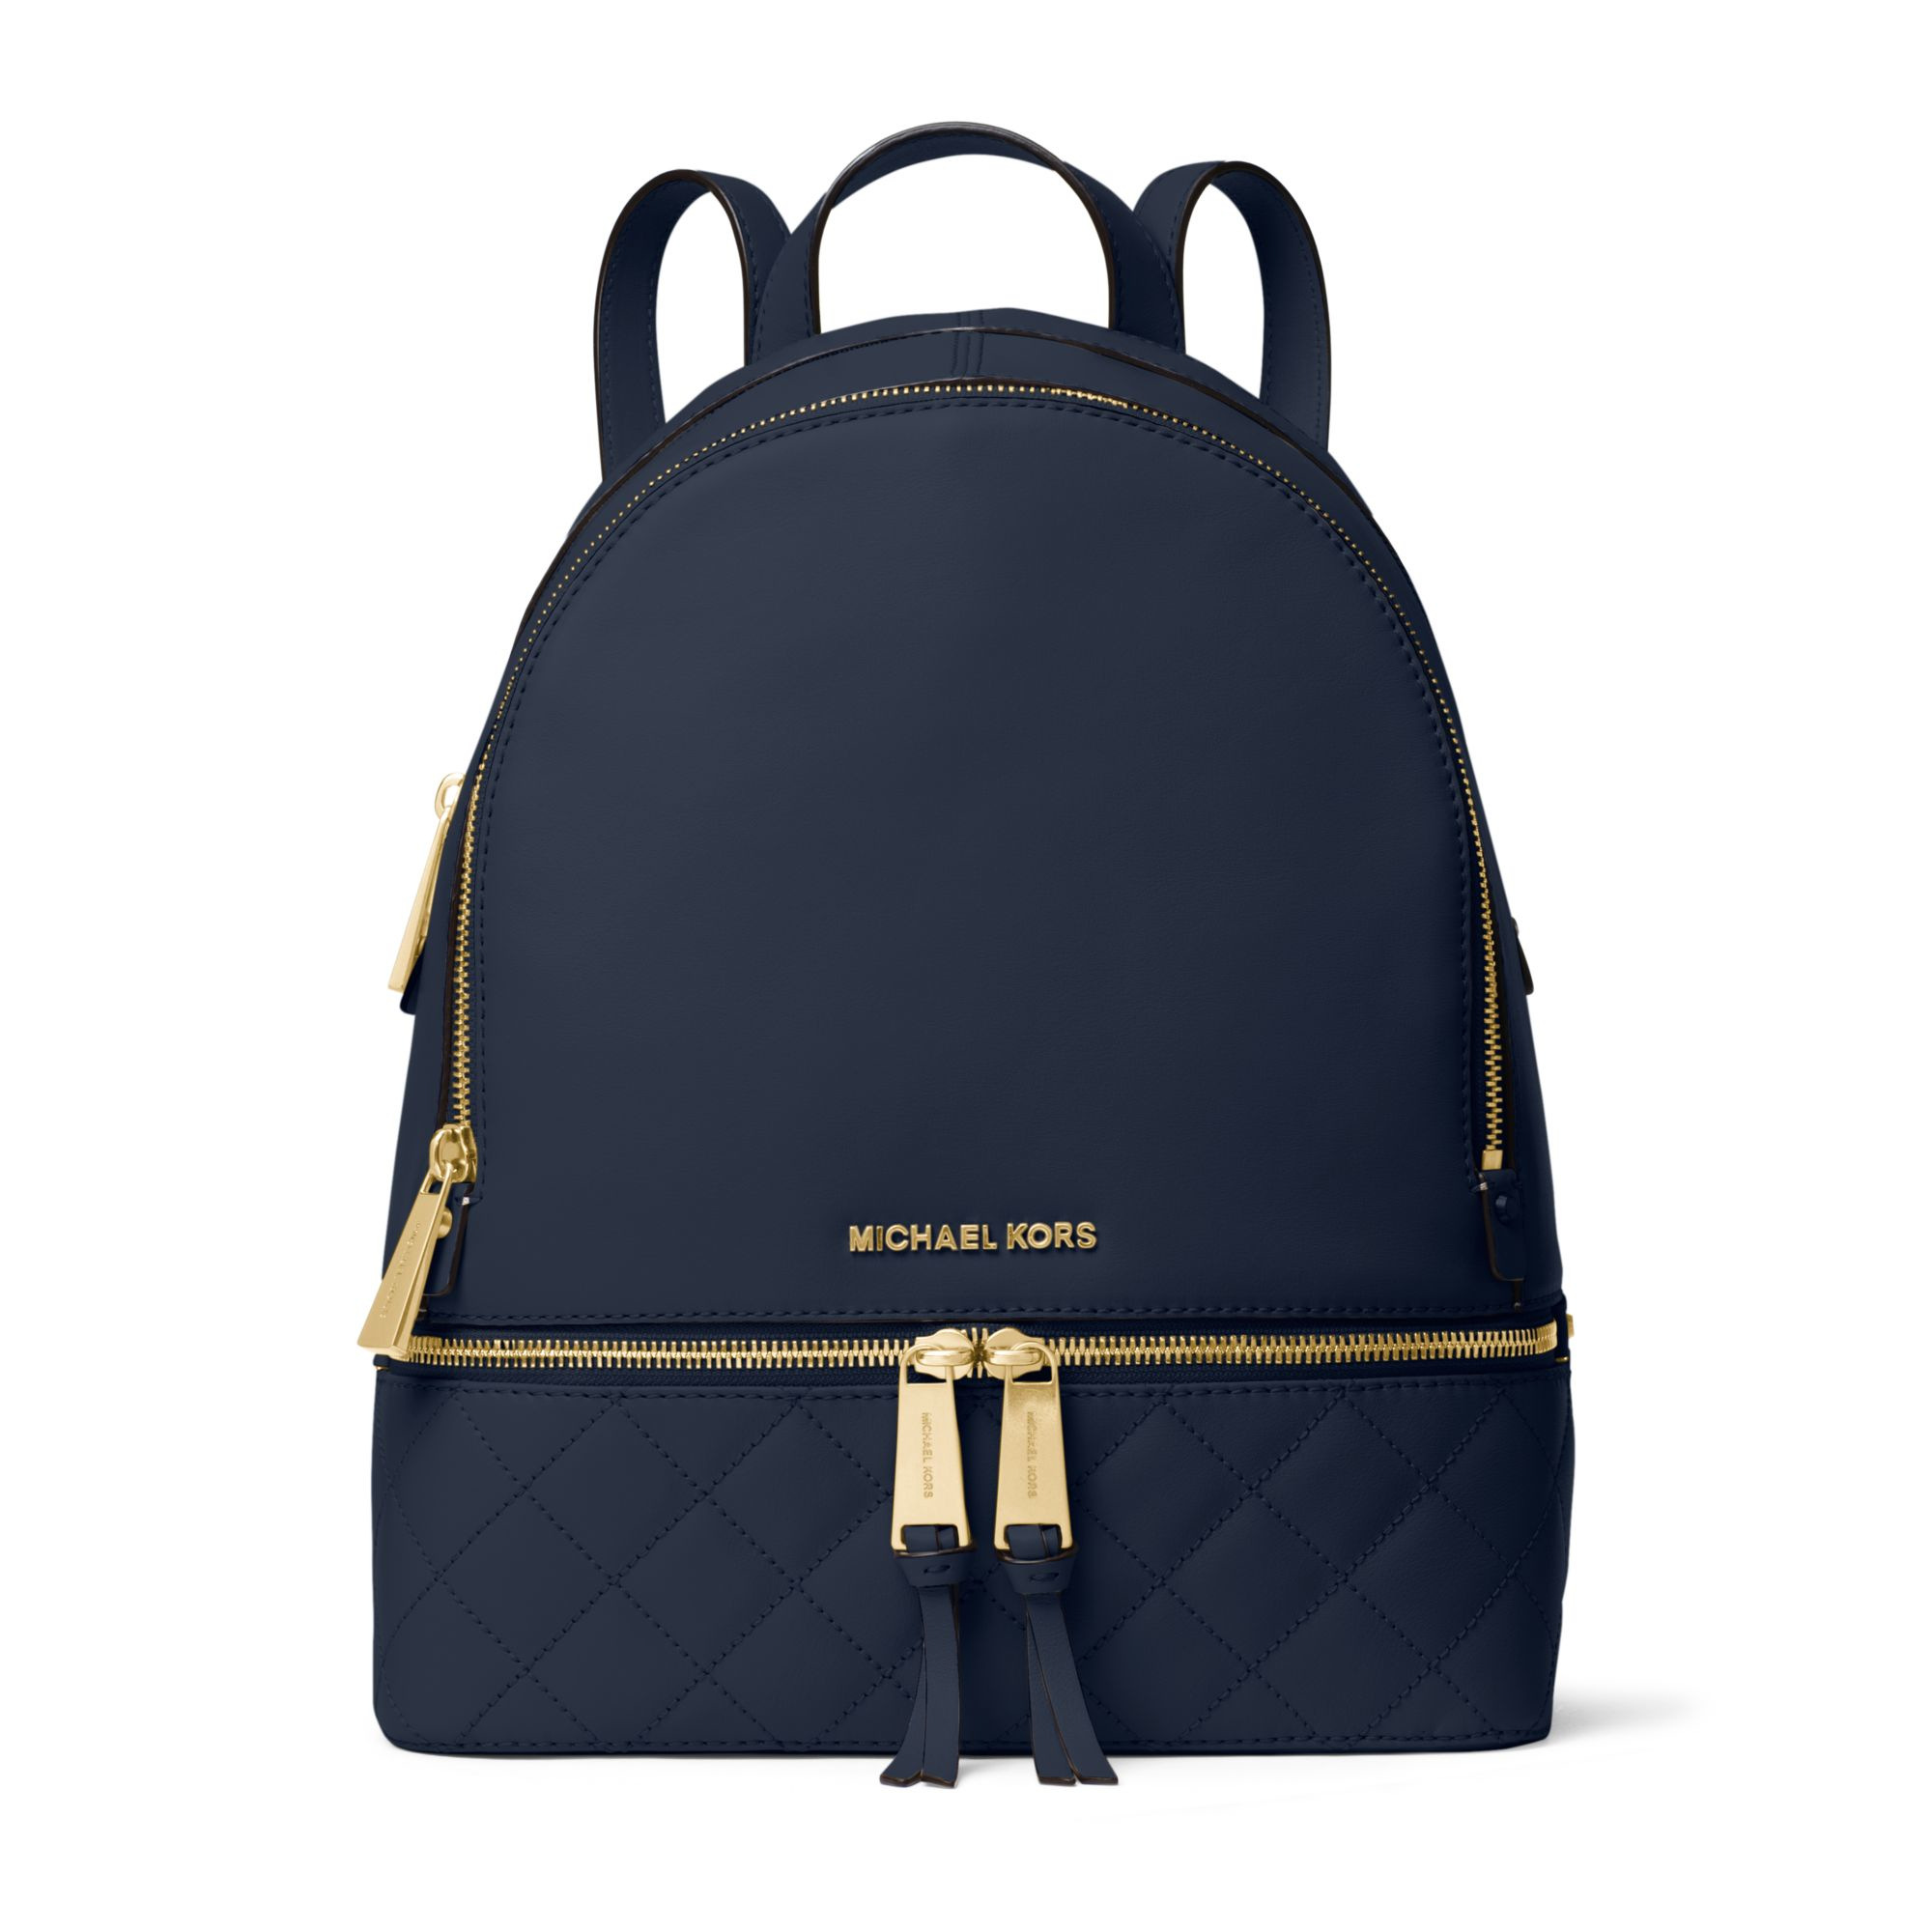 Lyst - Michael Kors Rhea Medium Quilted-leather Backpack in Blue